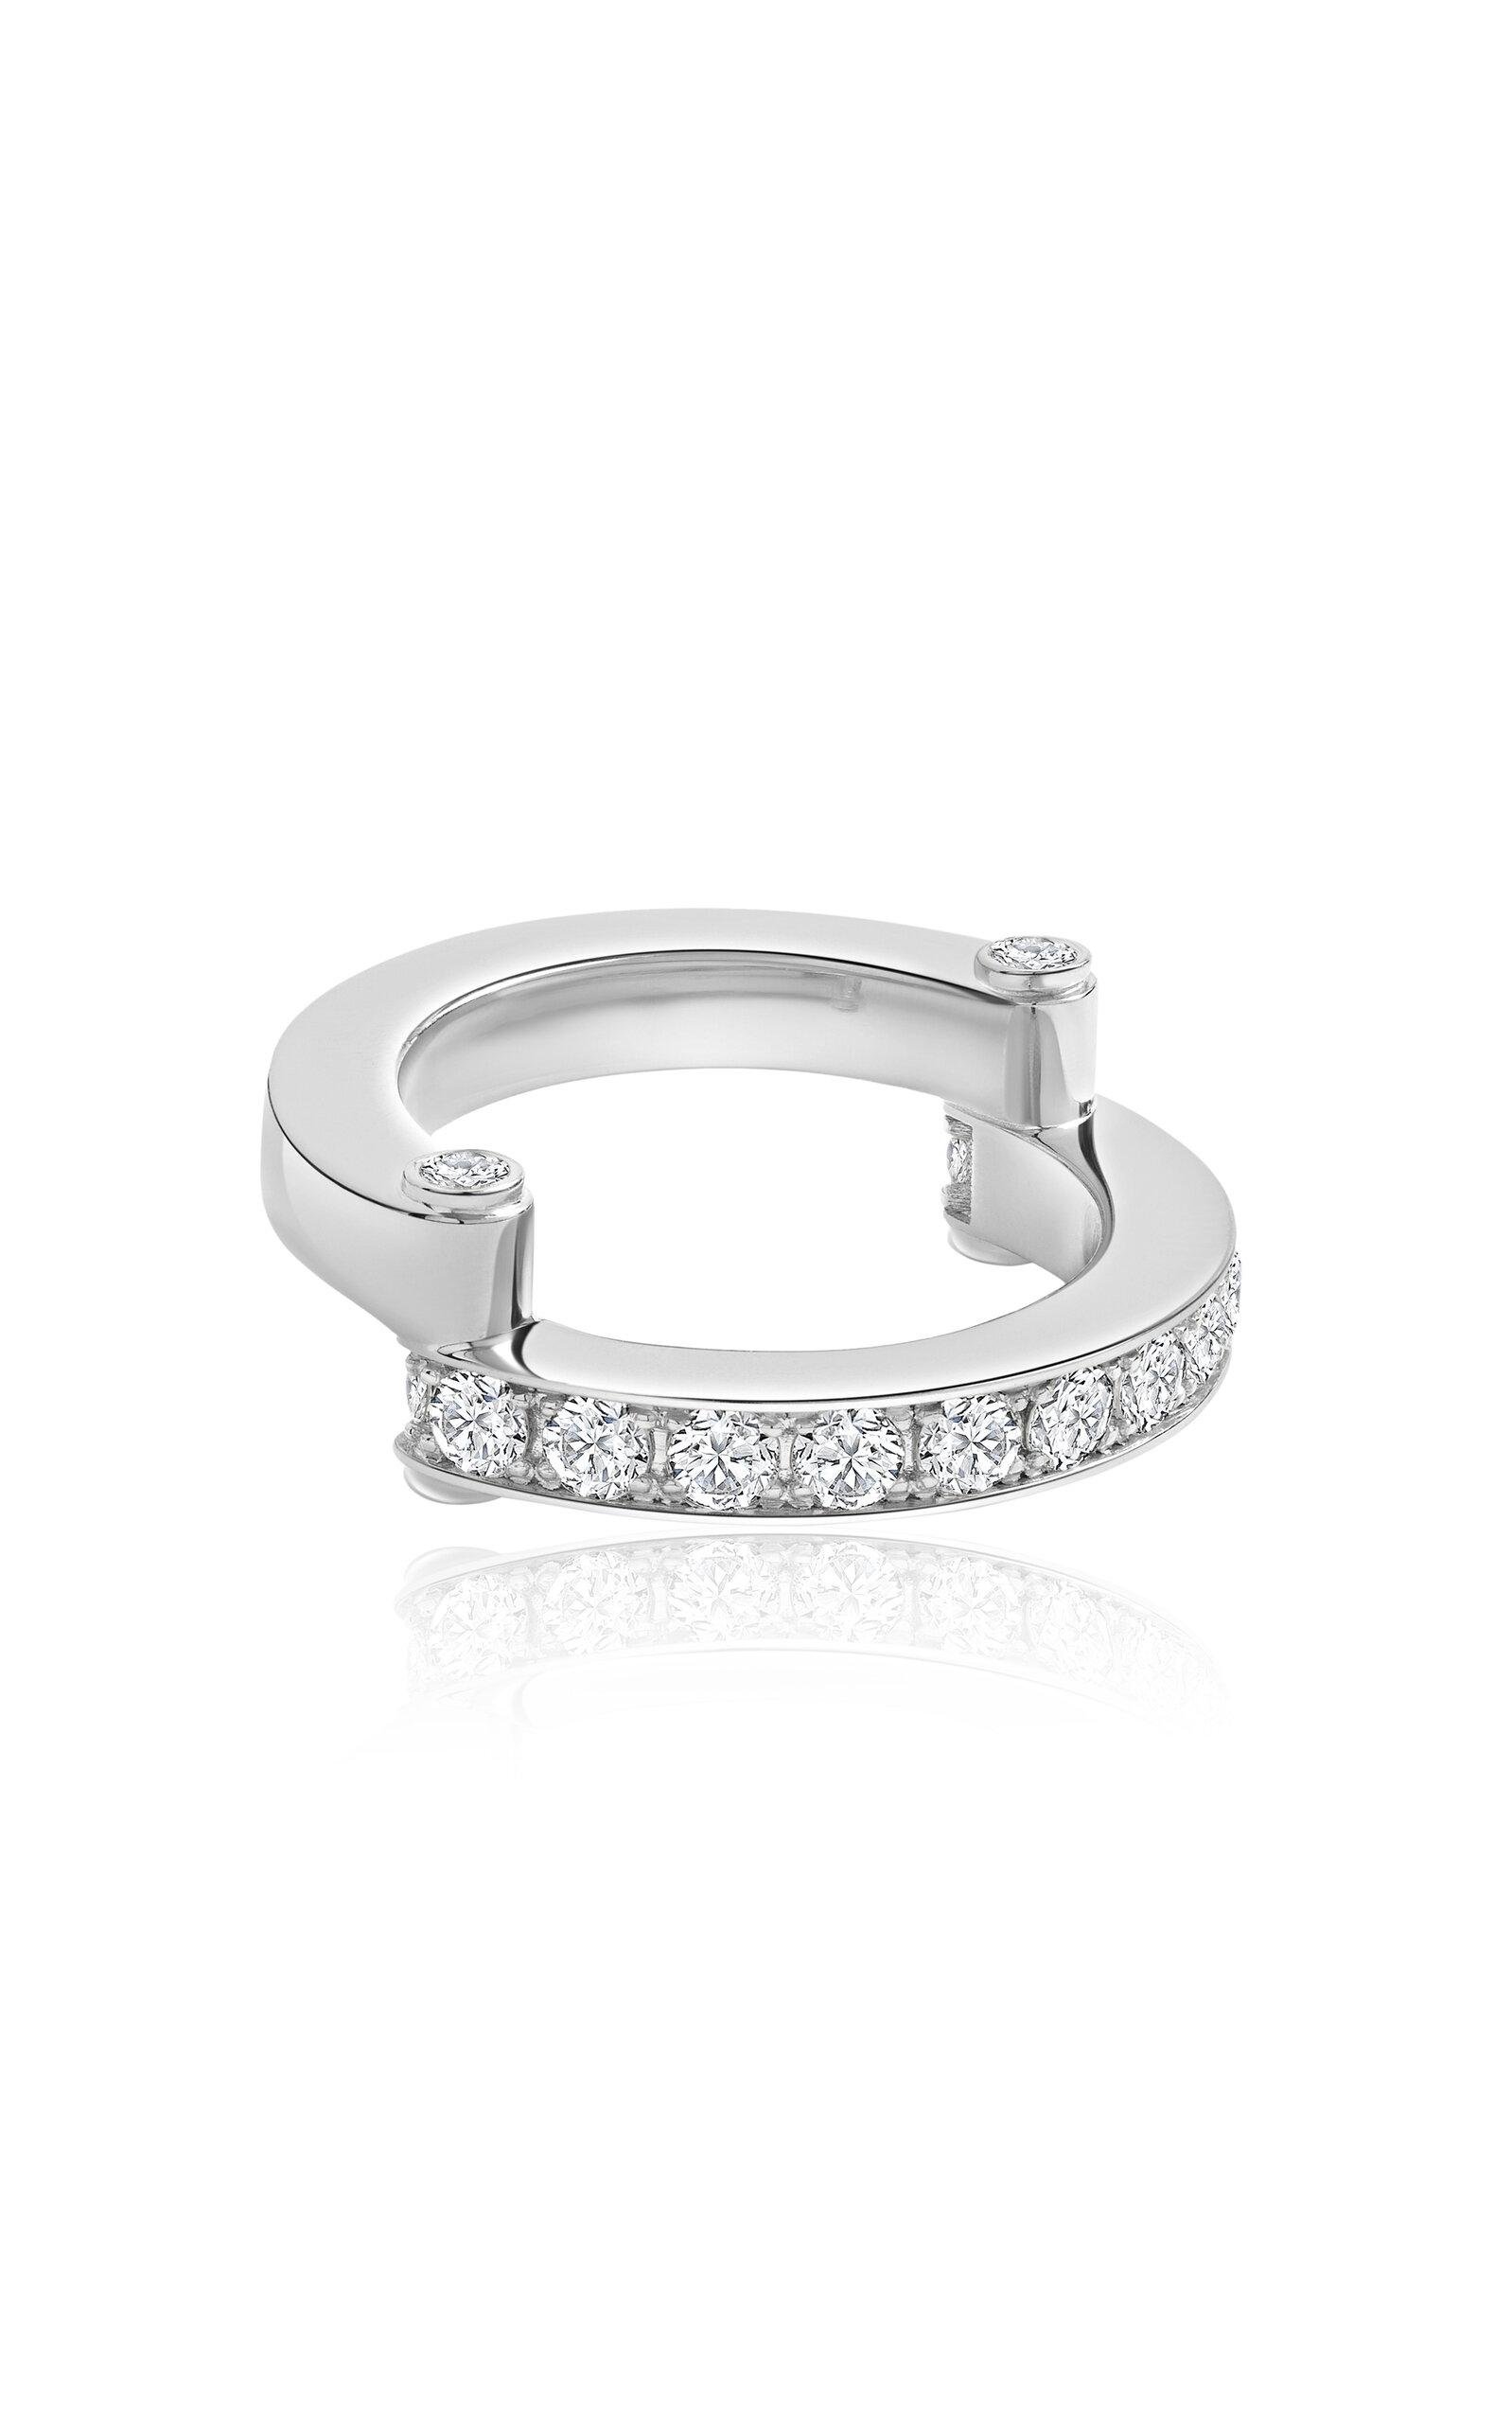 Erede - 18k White Gold Hinged Pavé Ring - Silver - US 8.5 - Only At Moda Operandi - Gifts For Her by EREDE